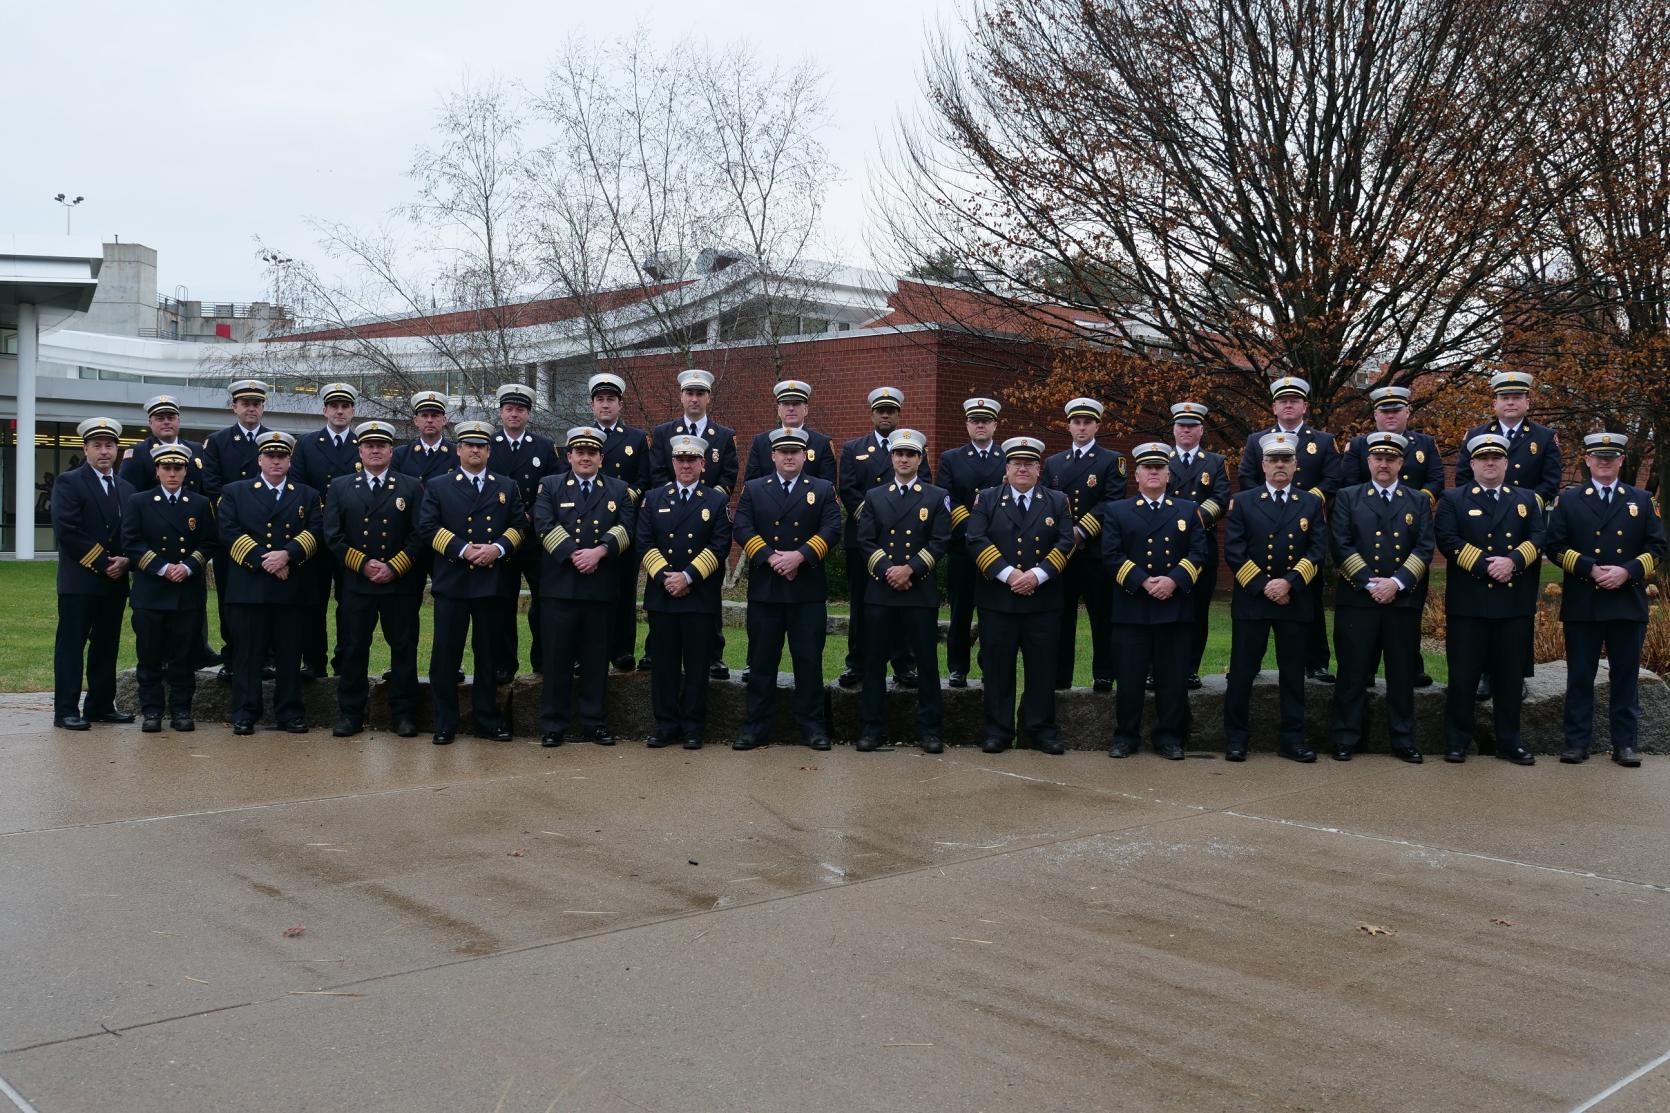 A group of fire chiefs in dress uniforms